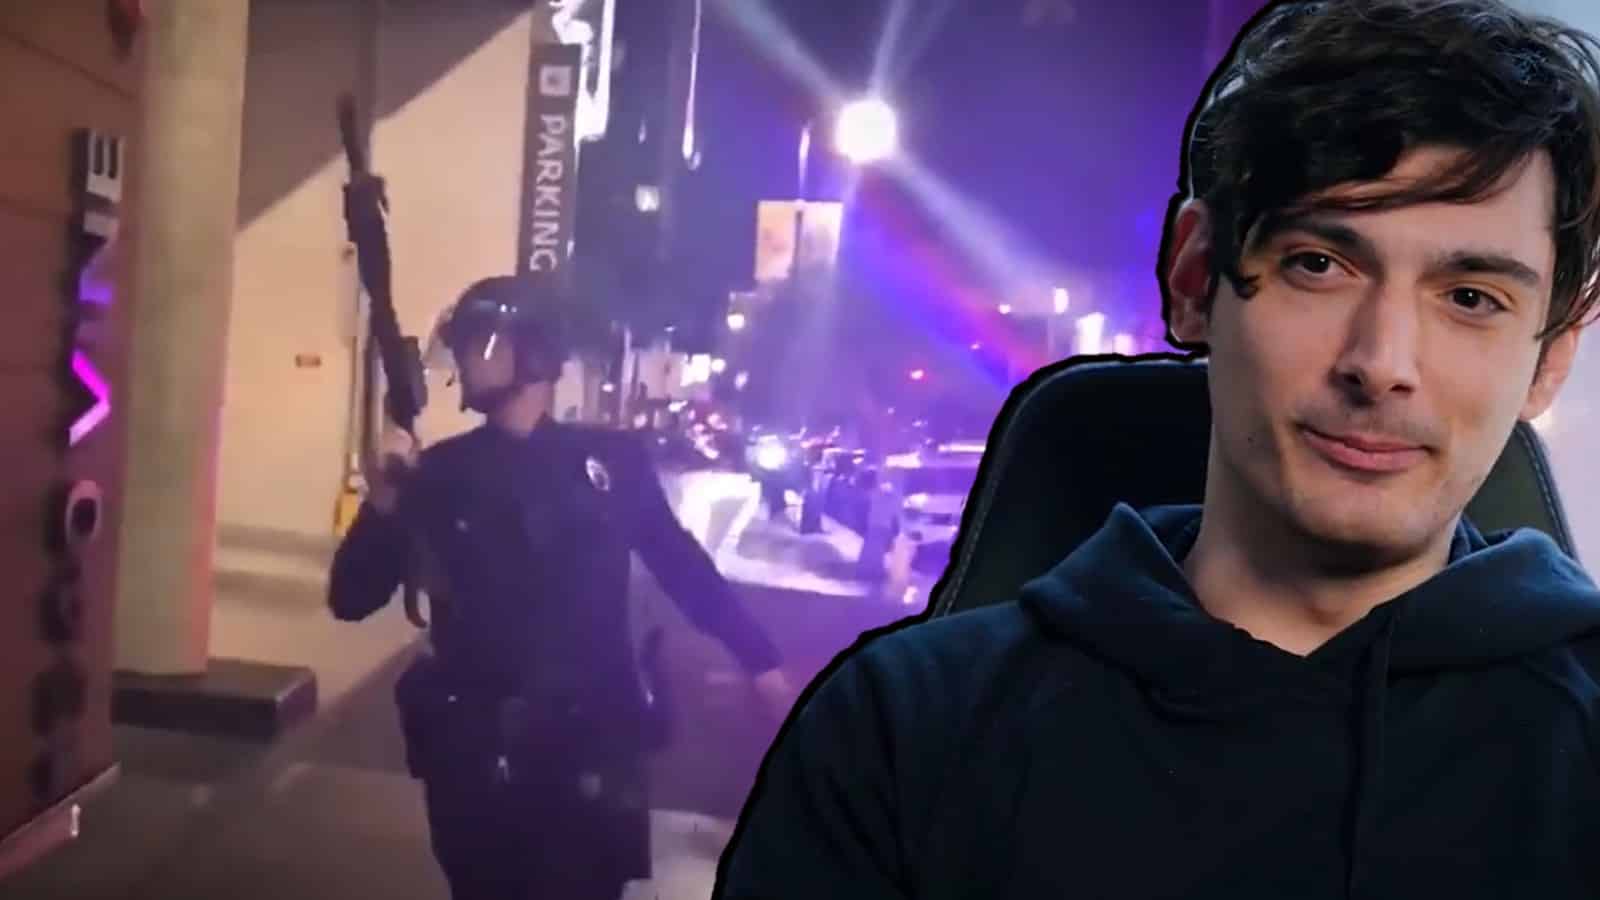 Ice Poseidon interview in front of SWAT team